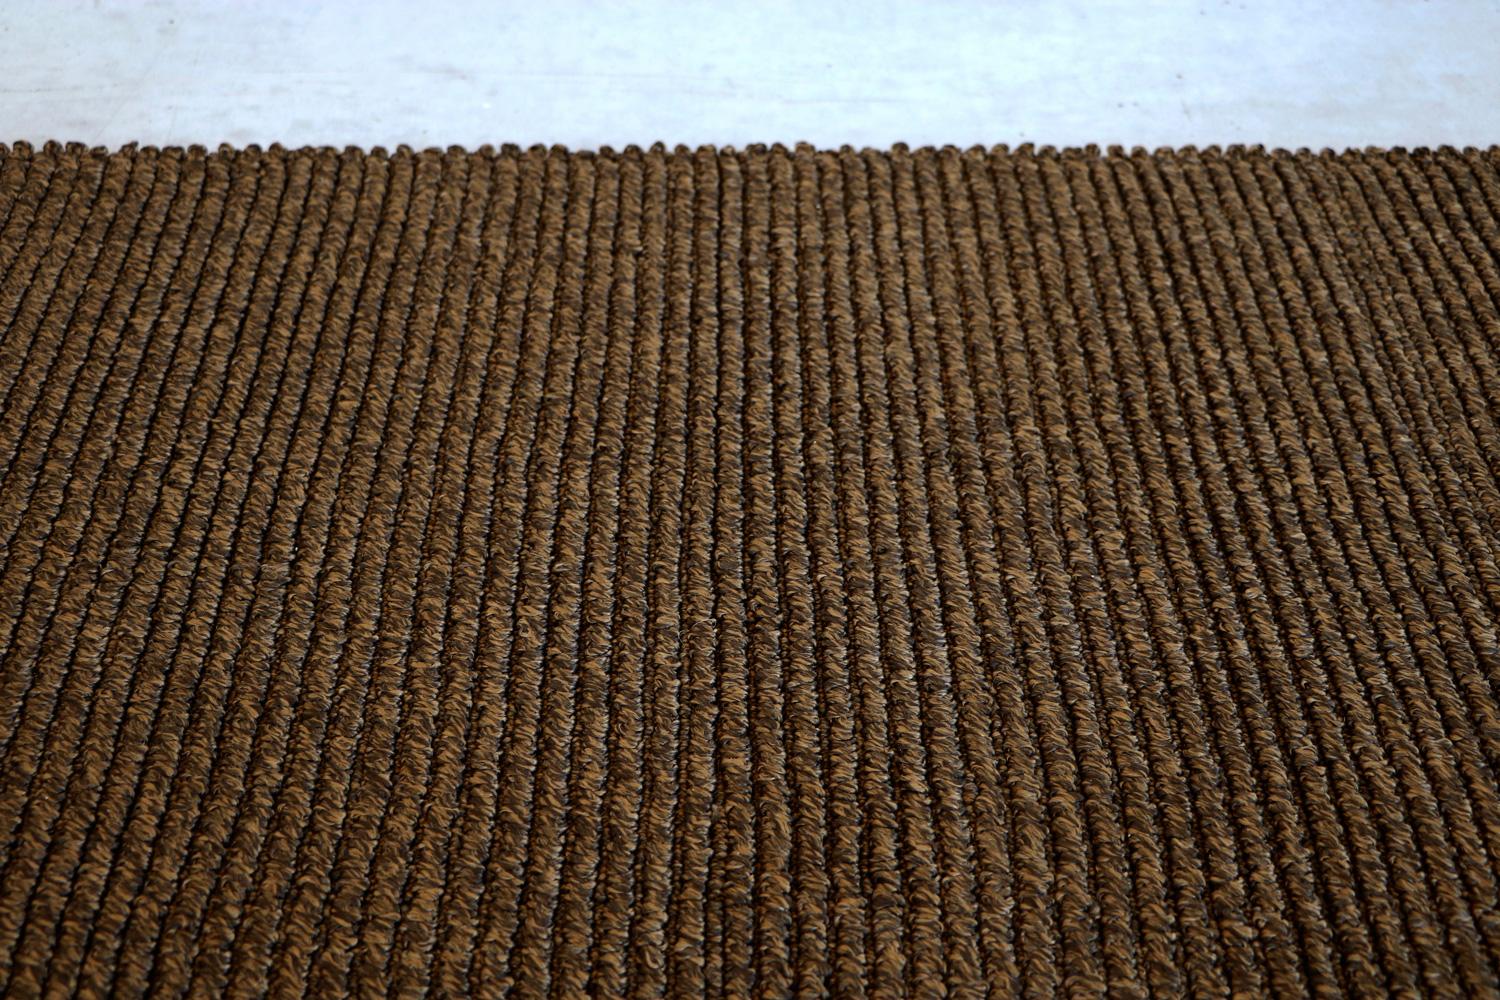 Modern Resistant In & Out Spring Trend Brown Rug by Deanna Comellini In Stock 70x200 cm For Sale